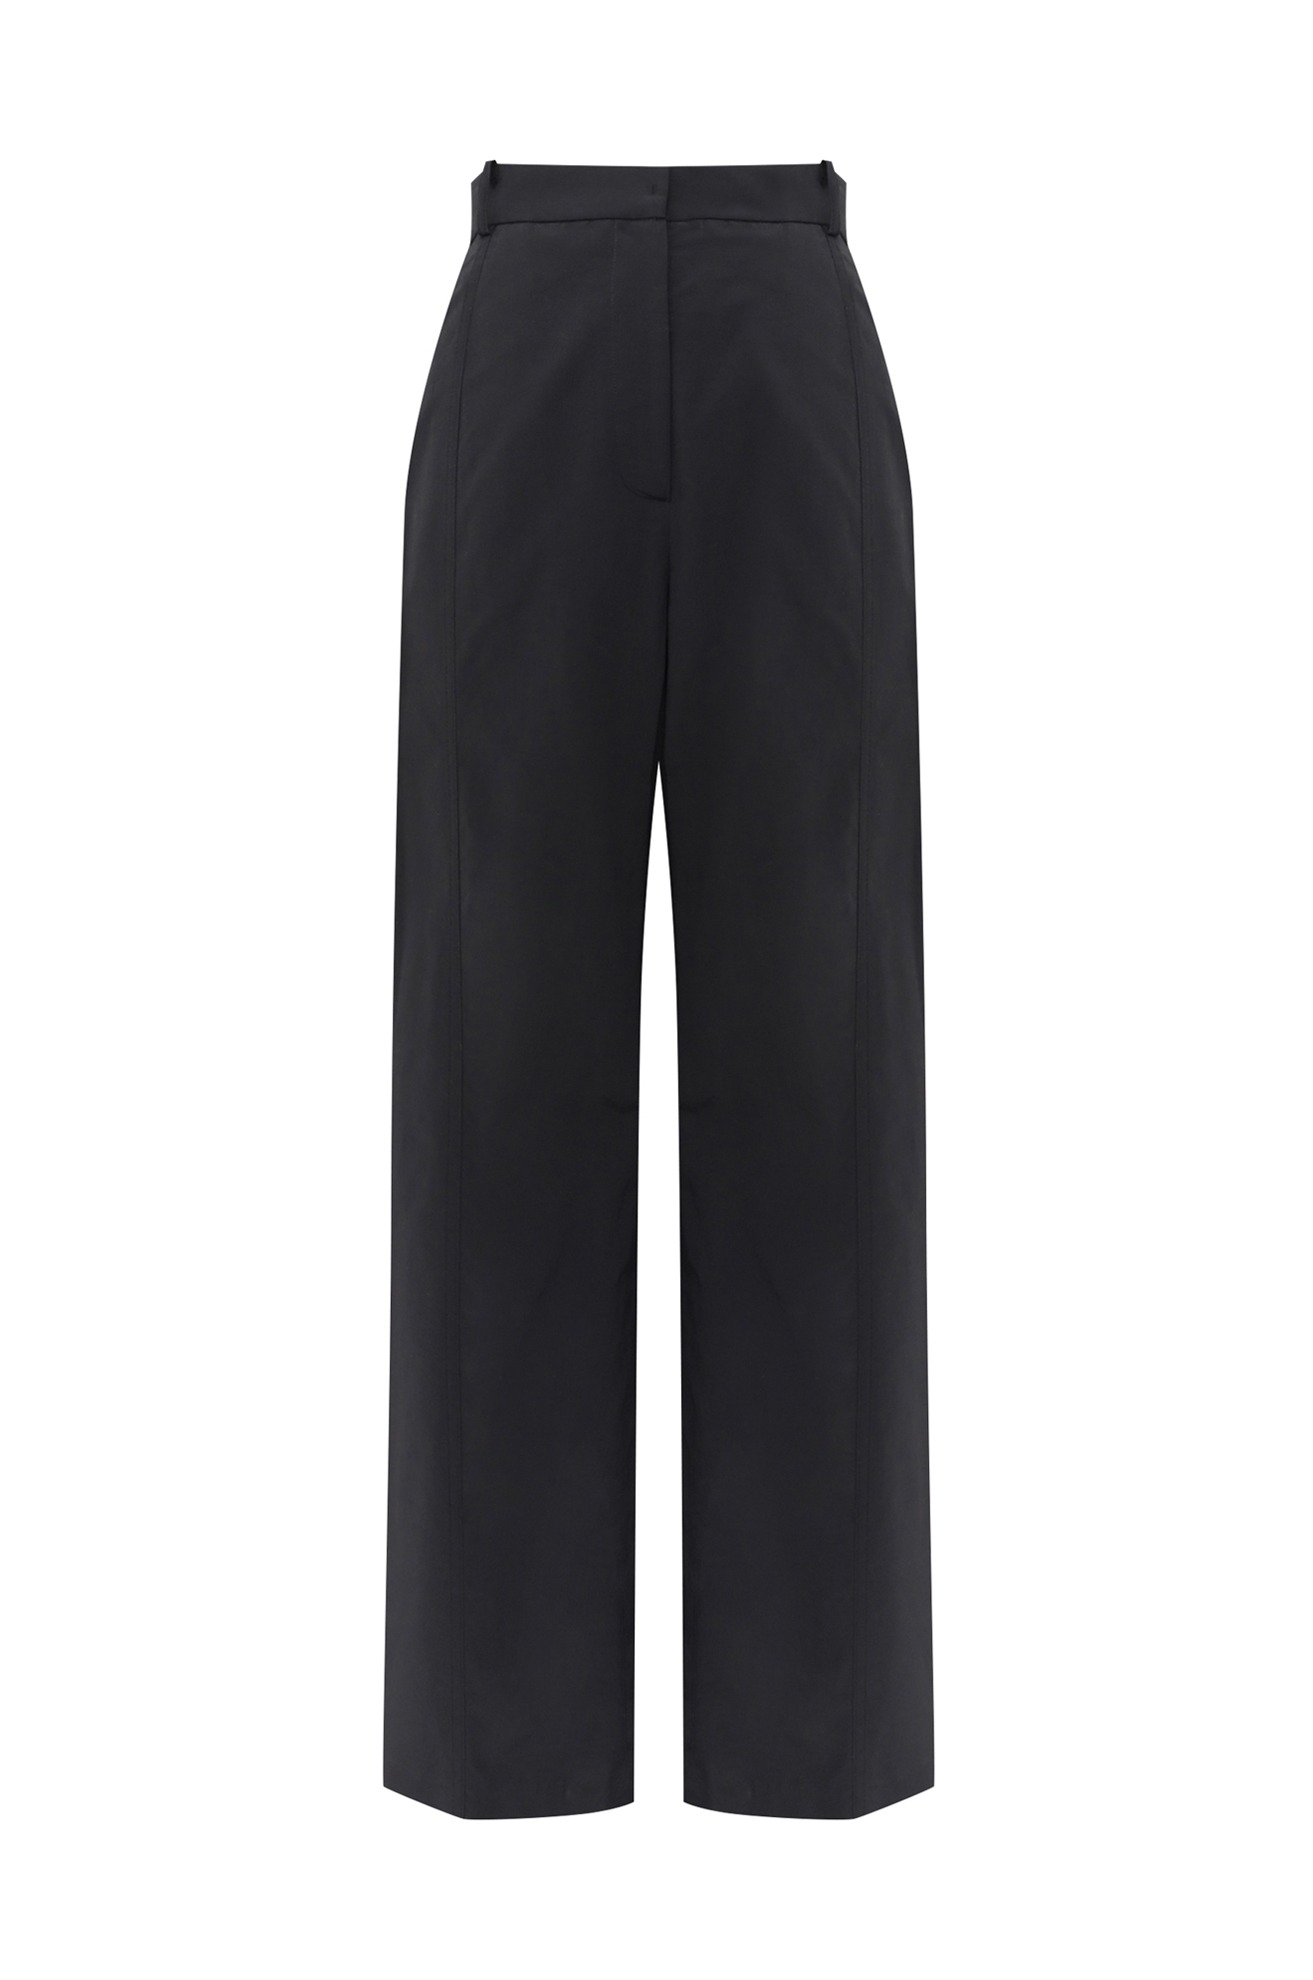 Front Seam Line Trousers